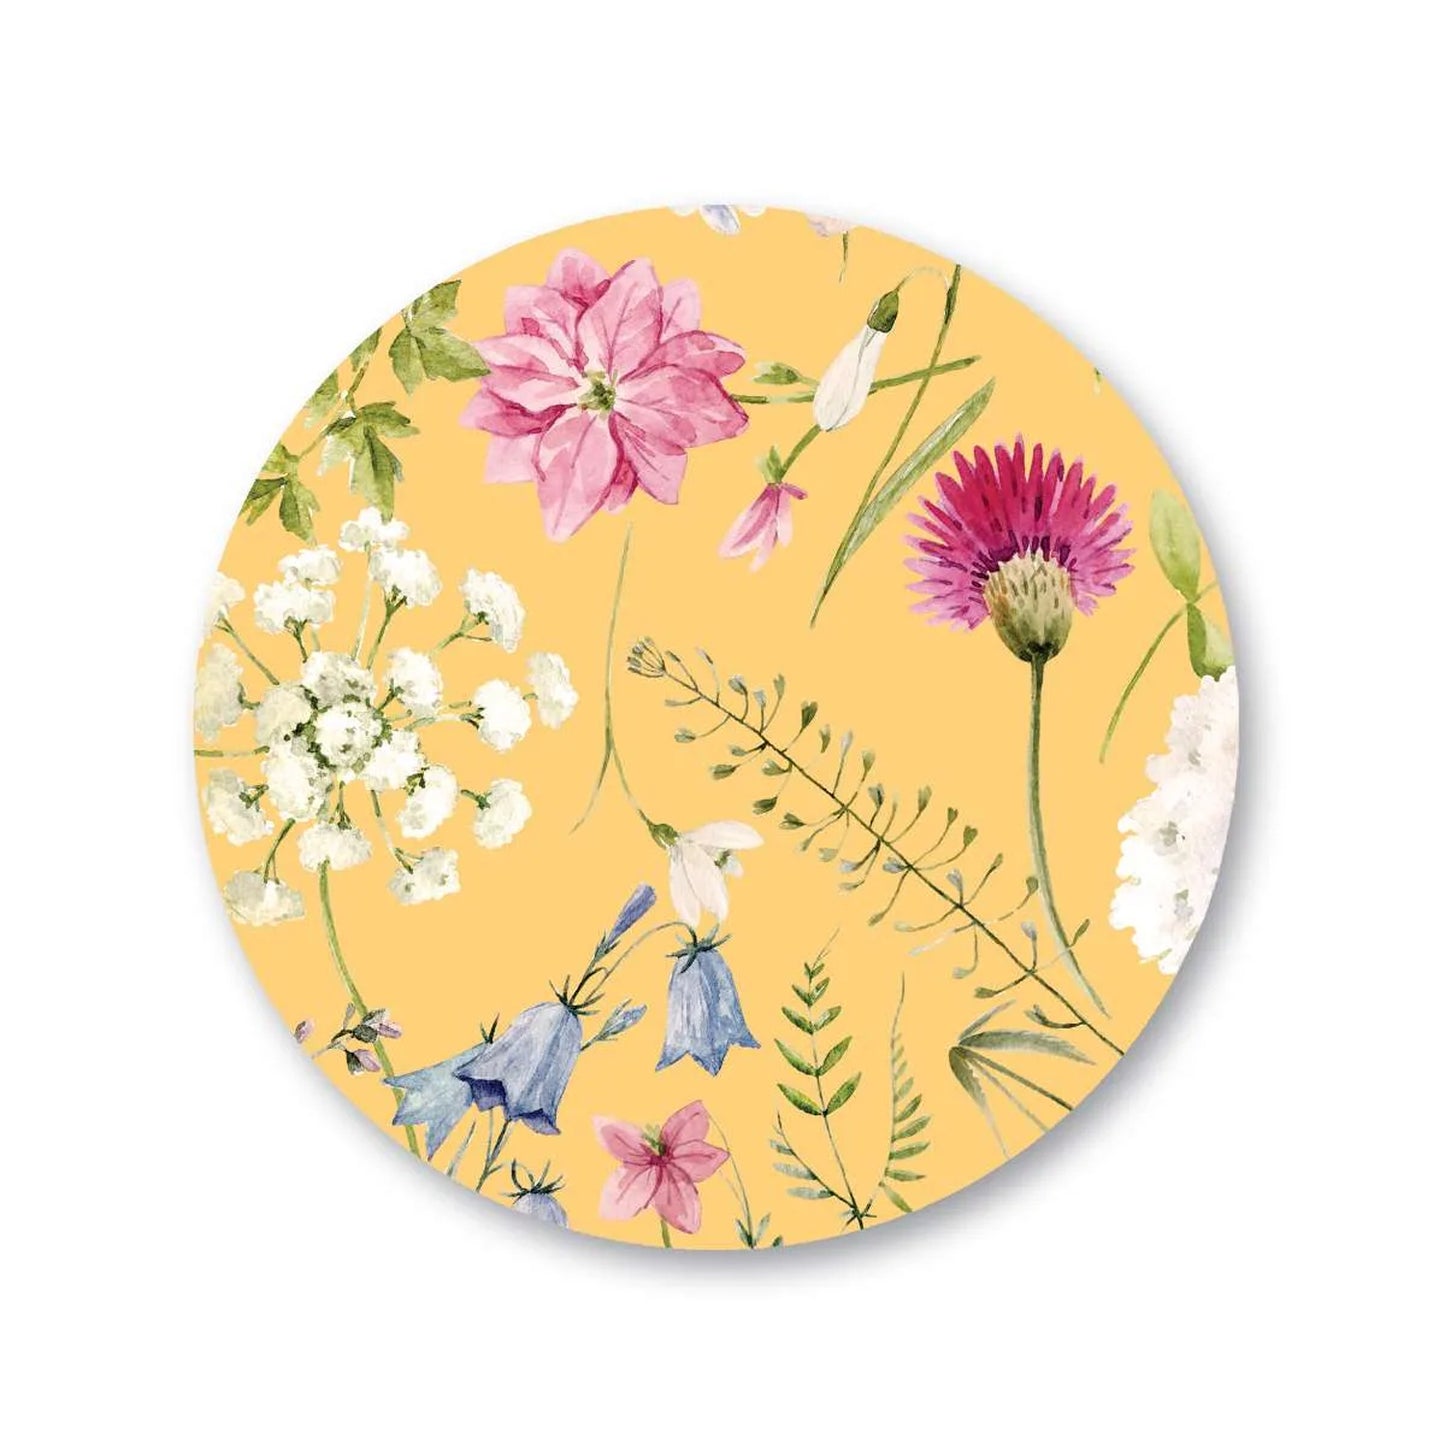 “Wildflowers” Trivets | CST 017 (set of 2)